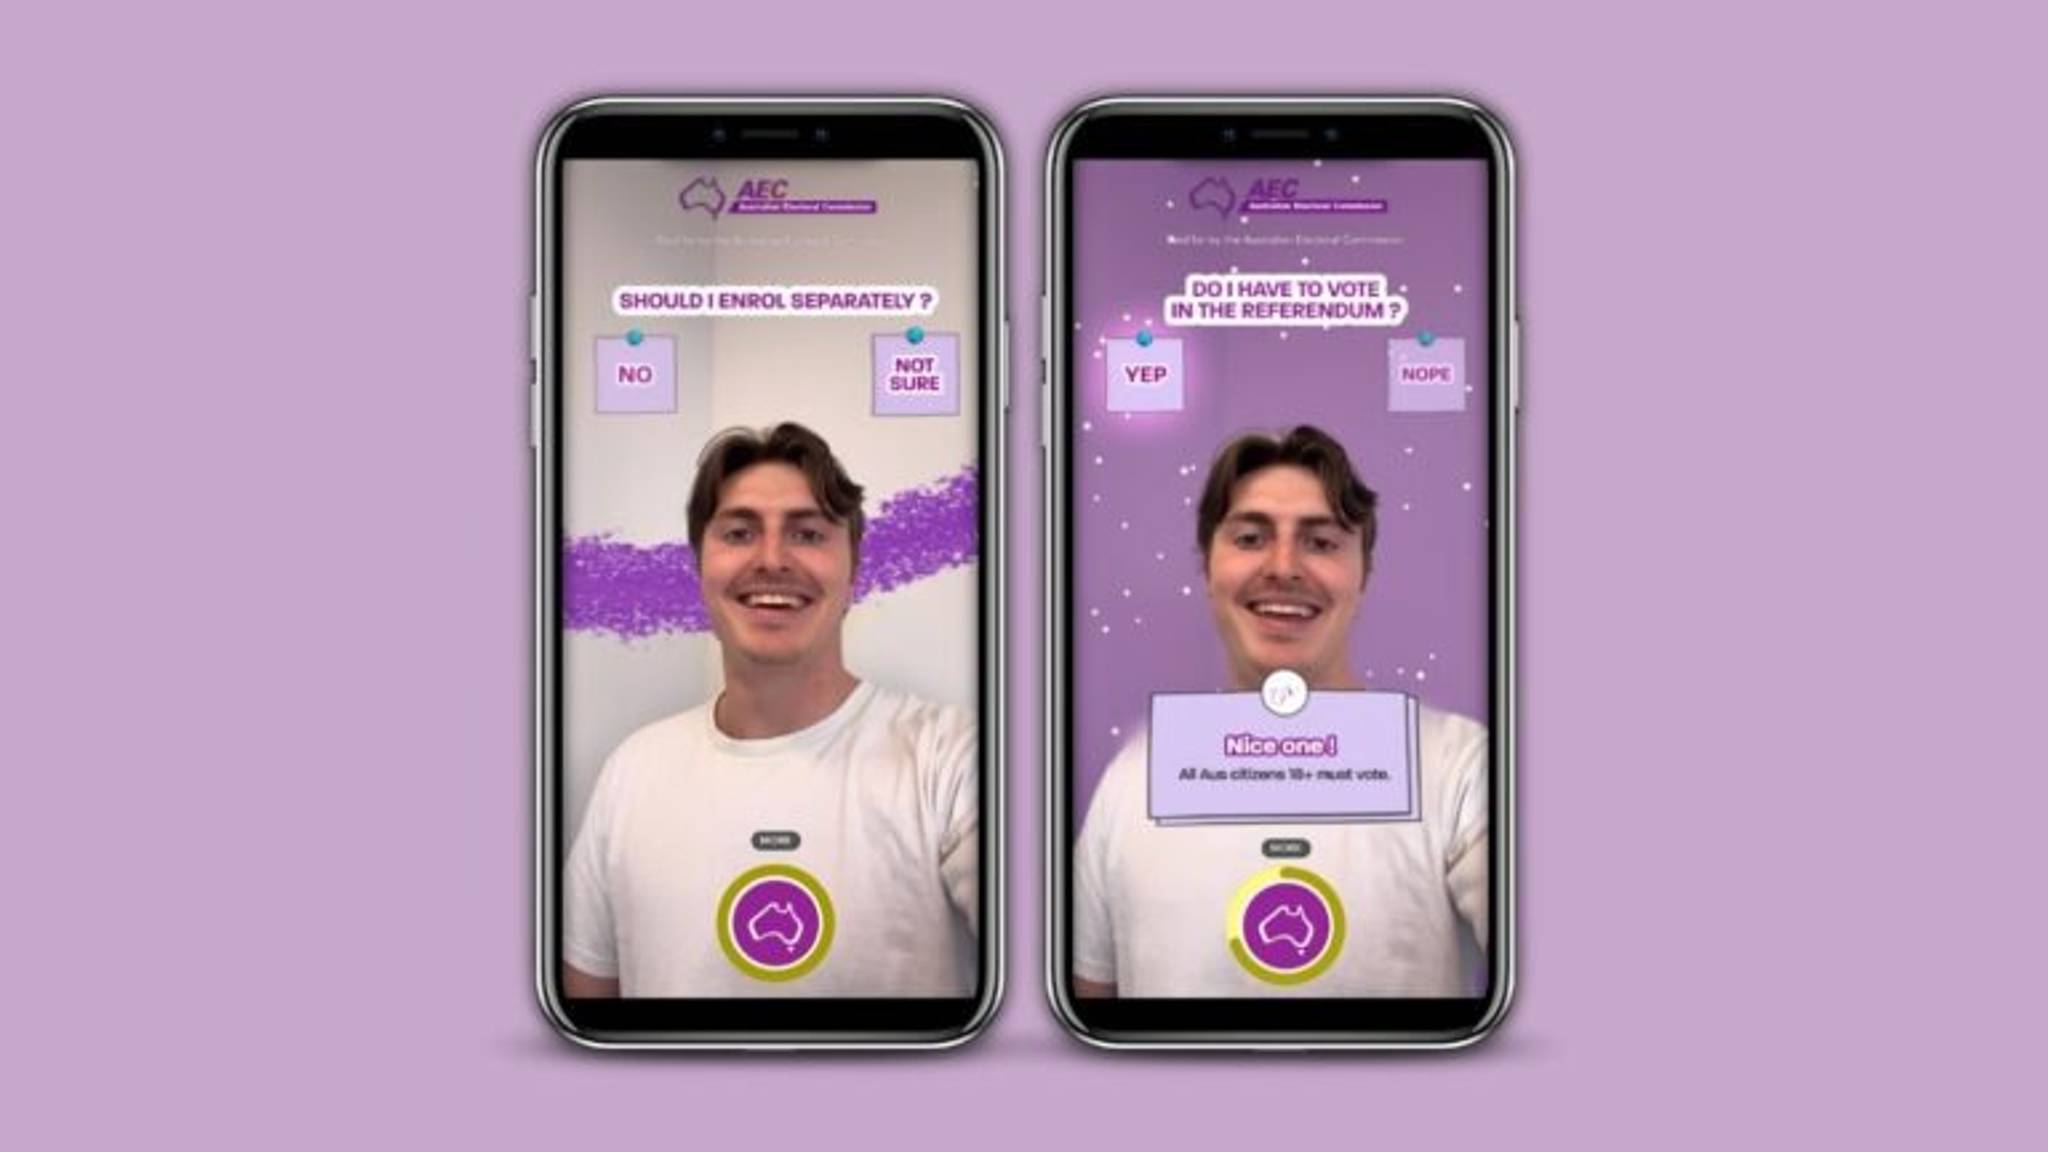 AEC partners with Snap to reach young Aussie voters